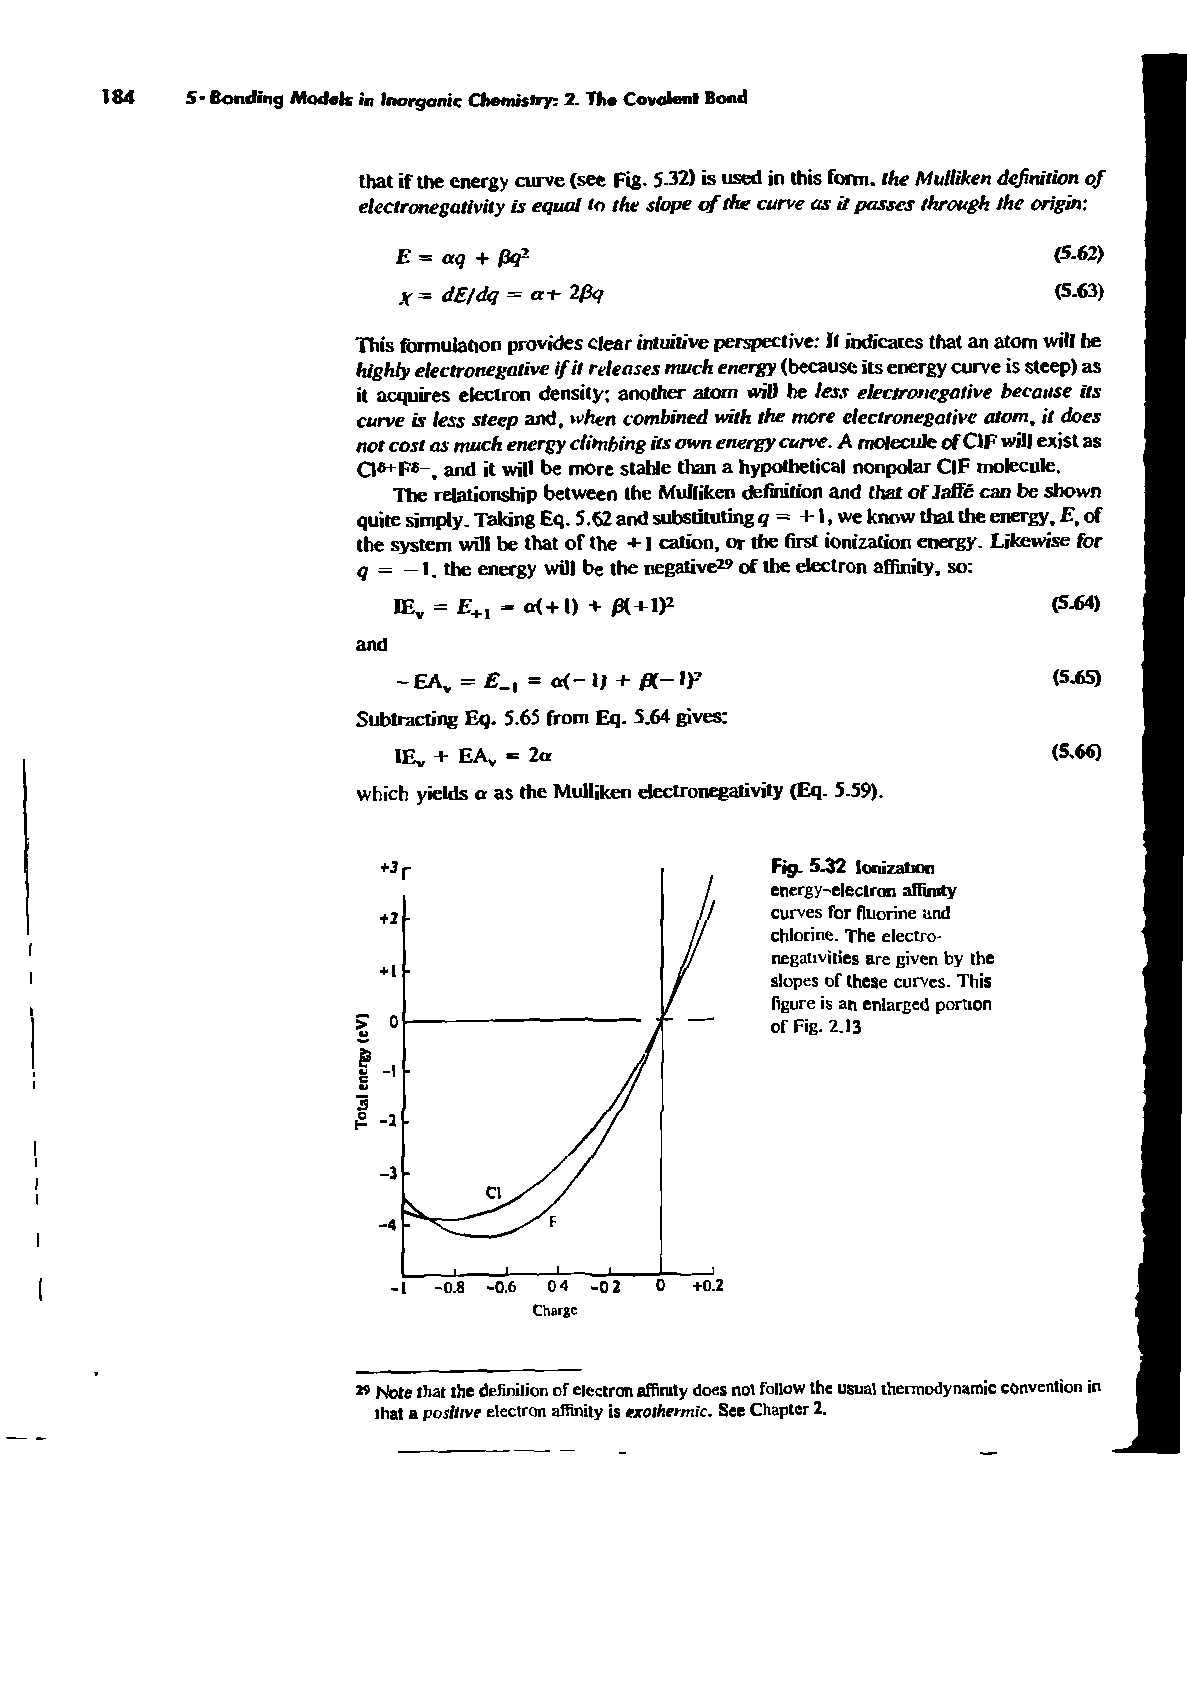 Fig. 5.32 Ionization energy-electron affinity curves for fluorine and chlorine. The electronegativities are given by the slopes of these curves. This figure is an enlarged portion of Fig. 2.13...